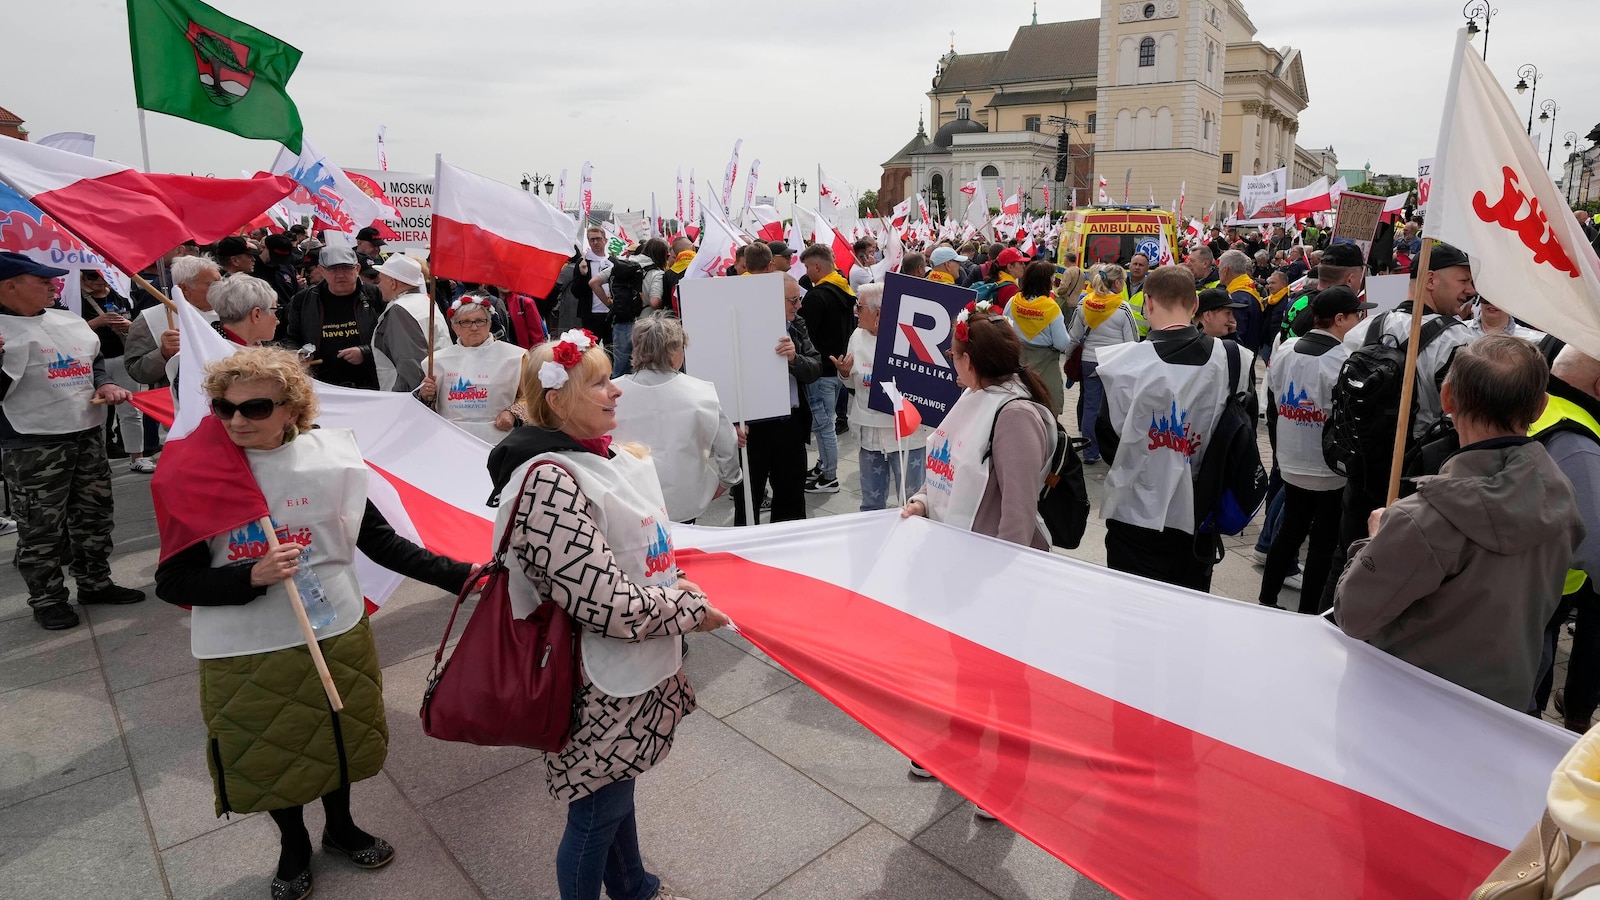 Polish farmers march in Warsaw against the EU's climate policies and the country's pro-EU leader